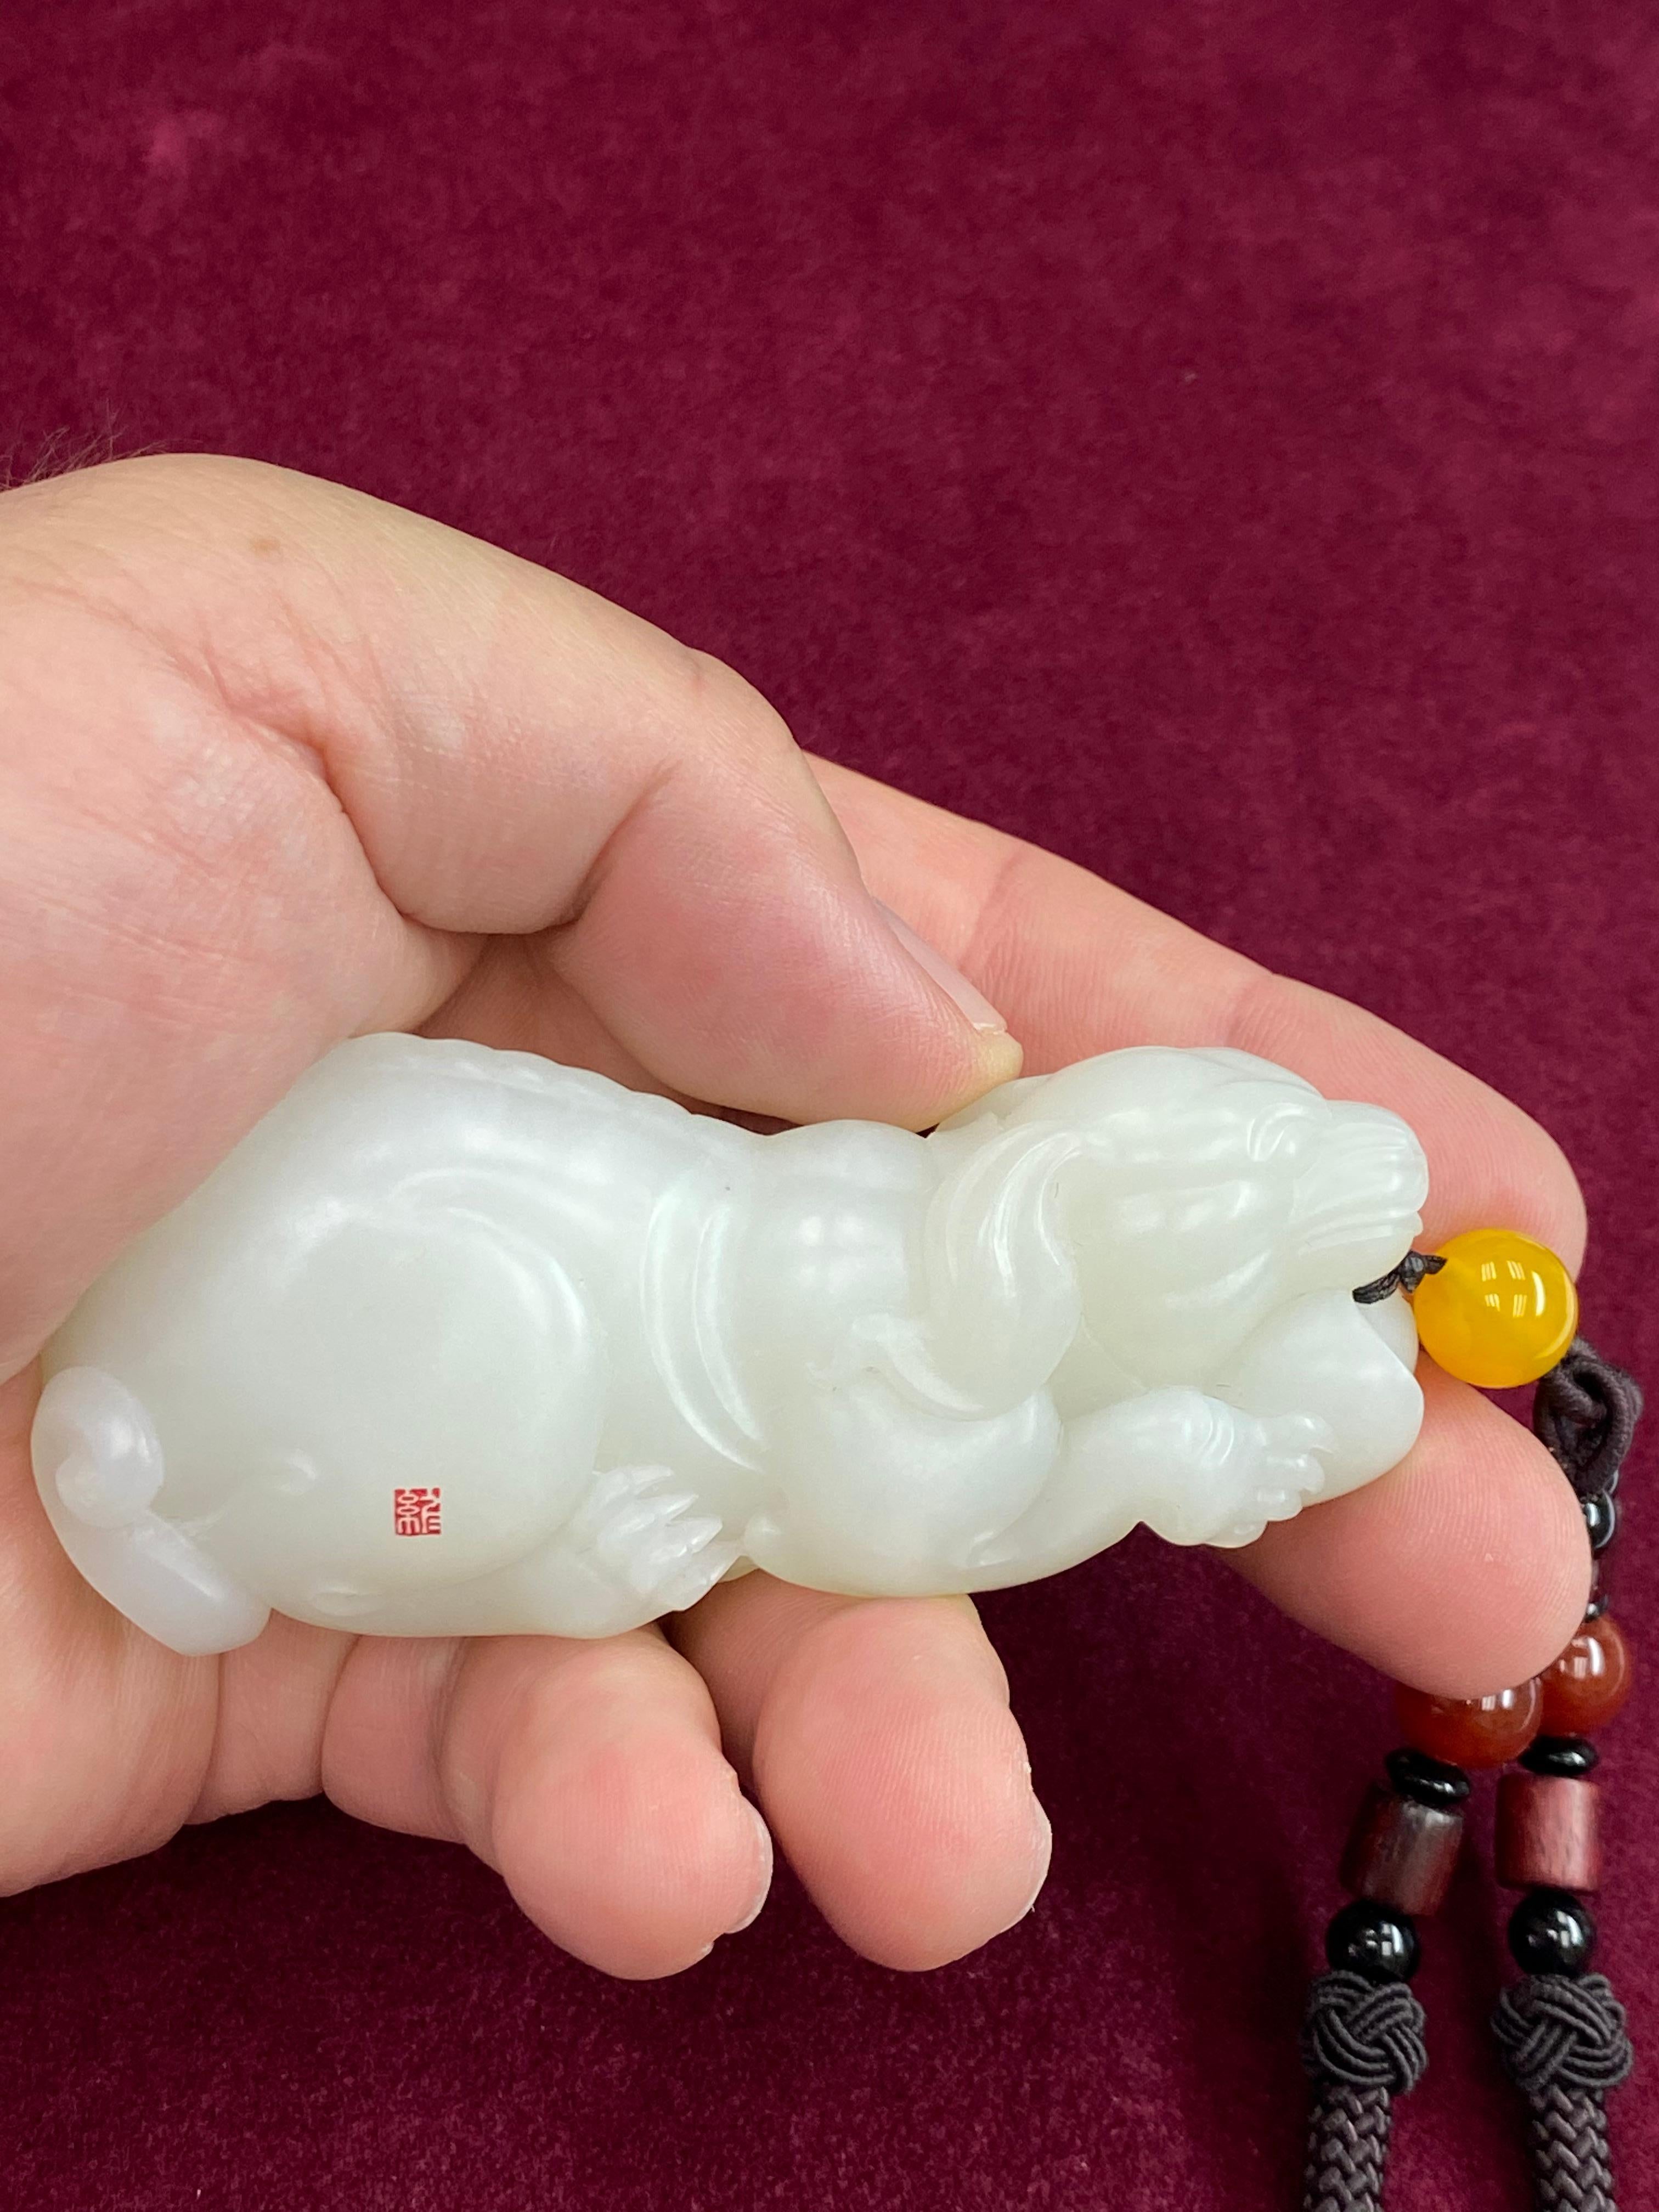 For your consideration is a certified natural nephrite jade. This jade carving is of a Chinese mythical beast or creature of very high quality. Traditionally Chinese mythical creatures are regarded as auspicious creatures that possessed mystical